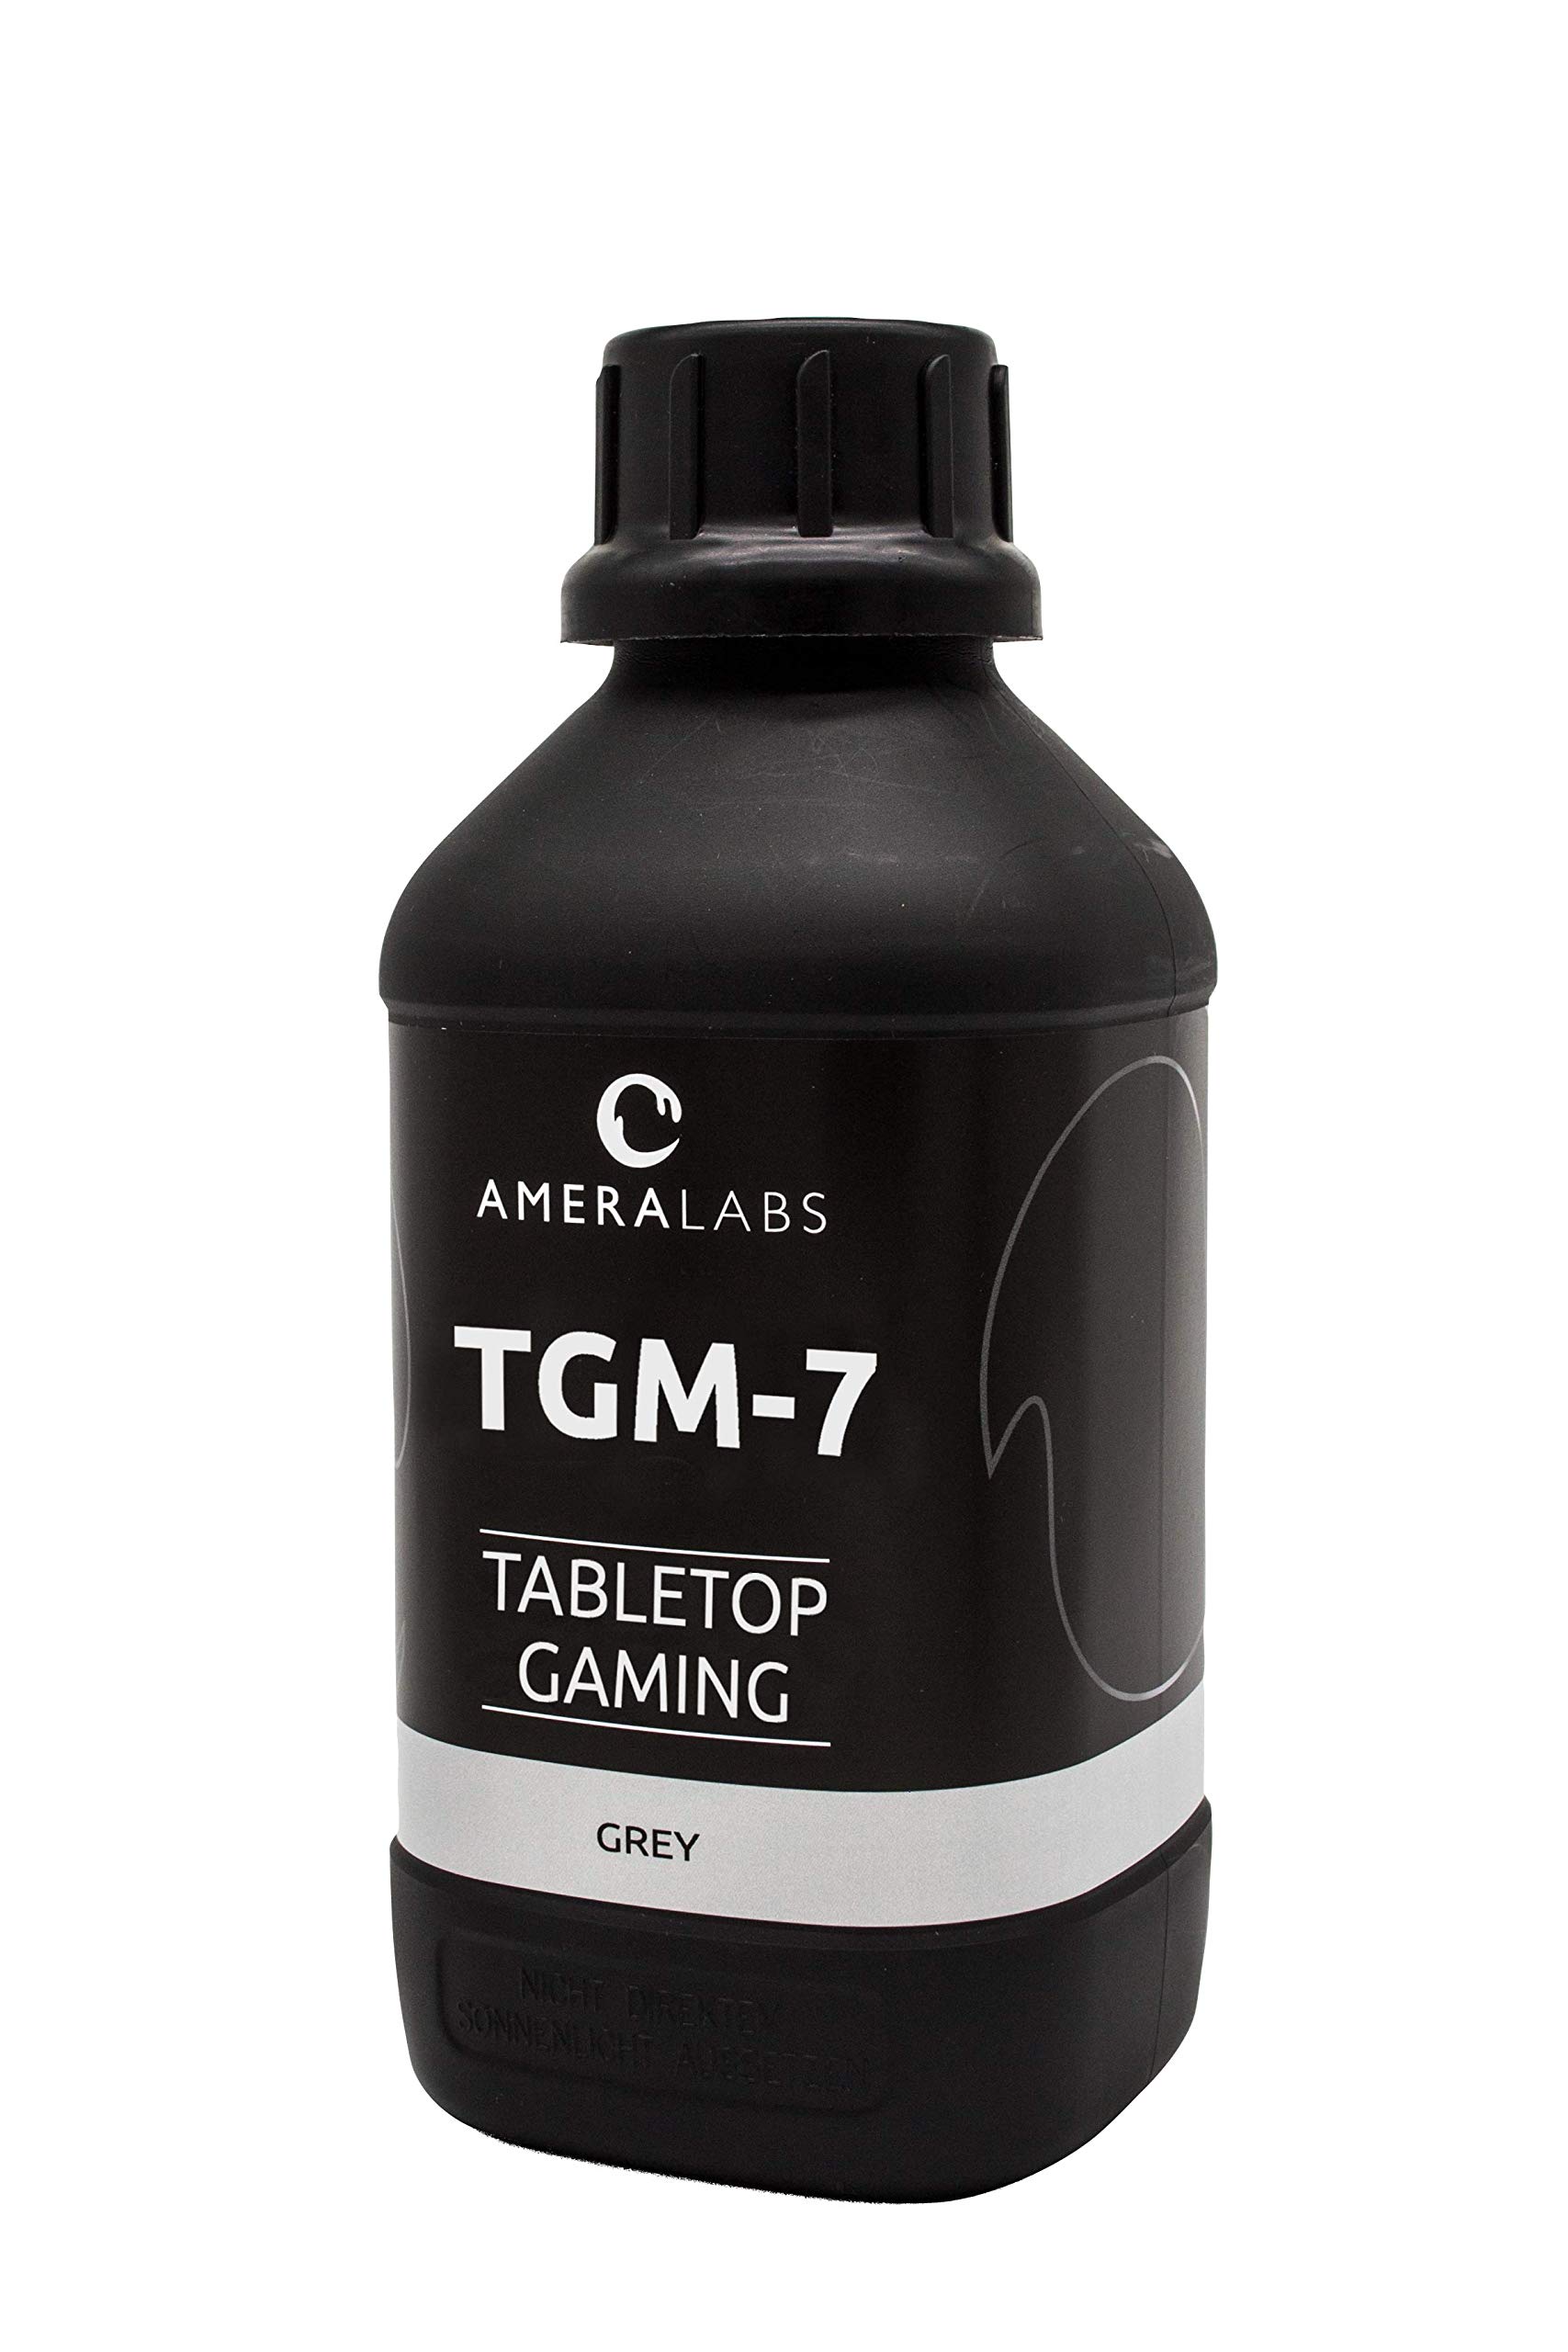 AmeraLabs Tgm-7 Resin Designed For Tabletop Miniatures - Tough, High Resolution, Grey, Low Odor, Fast Curing On Lcd Msla Uv 3D Printers, 1